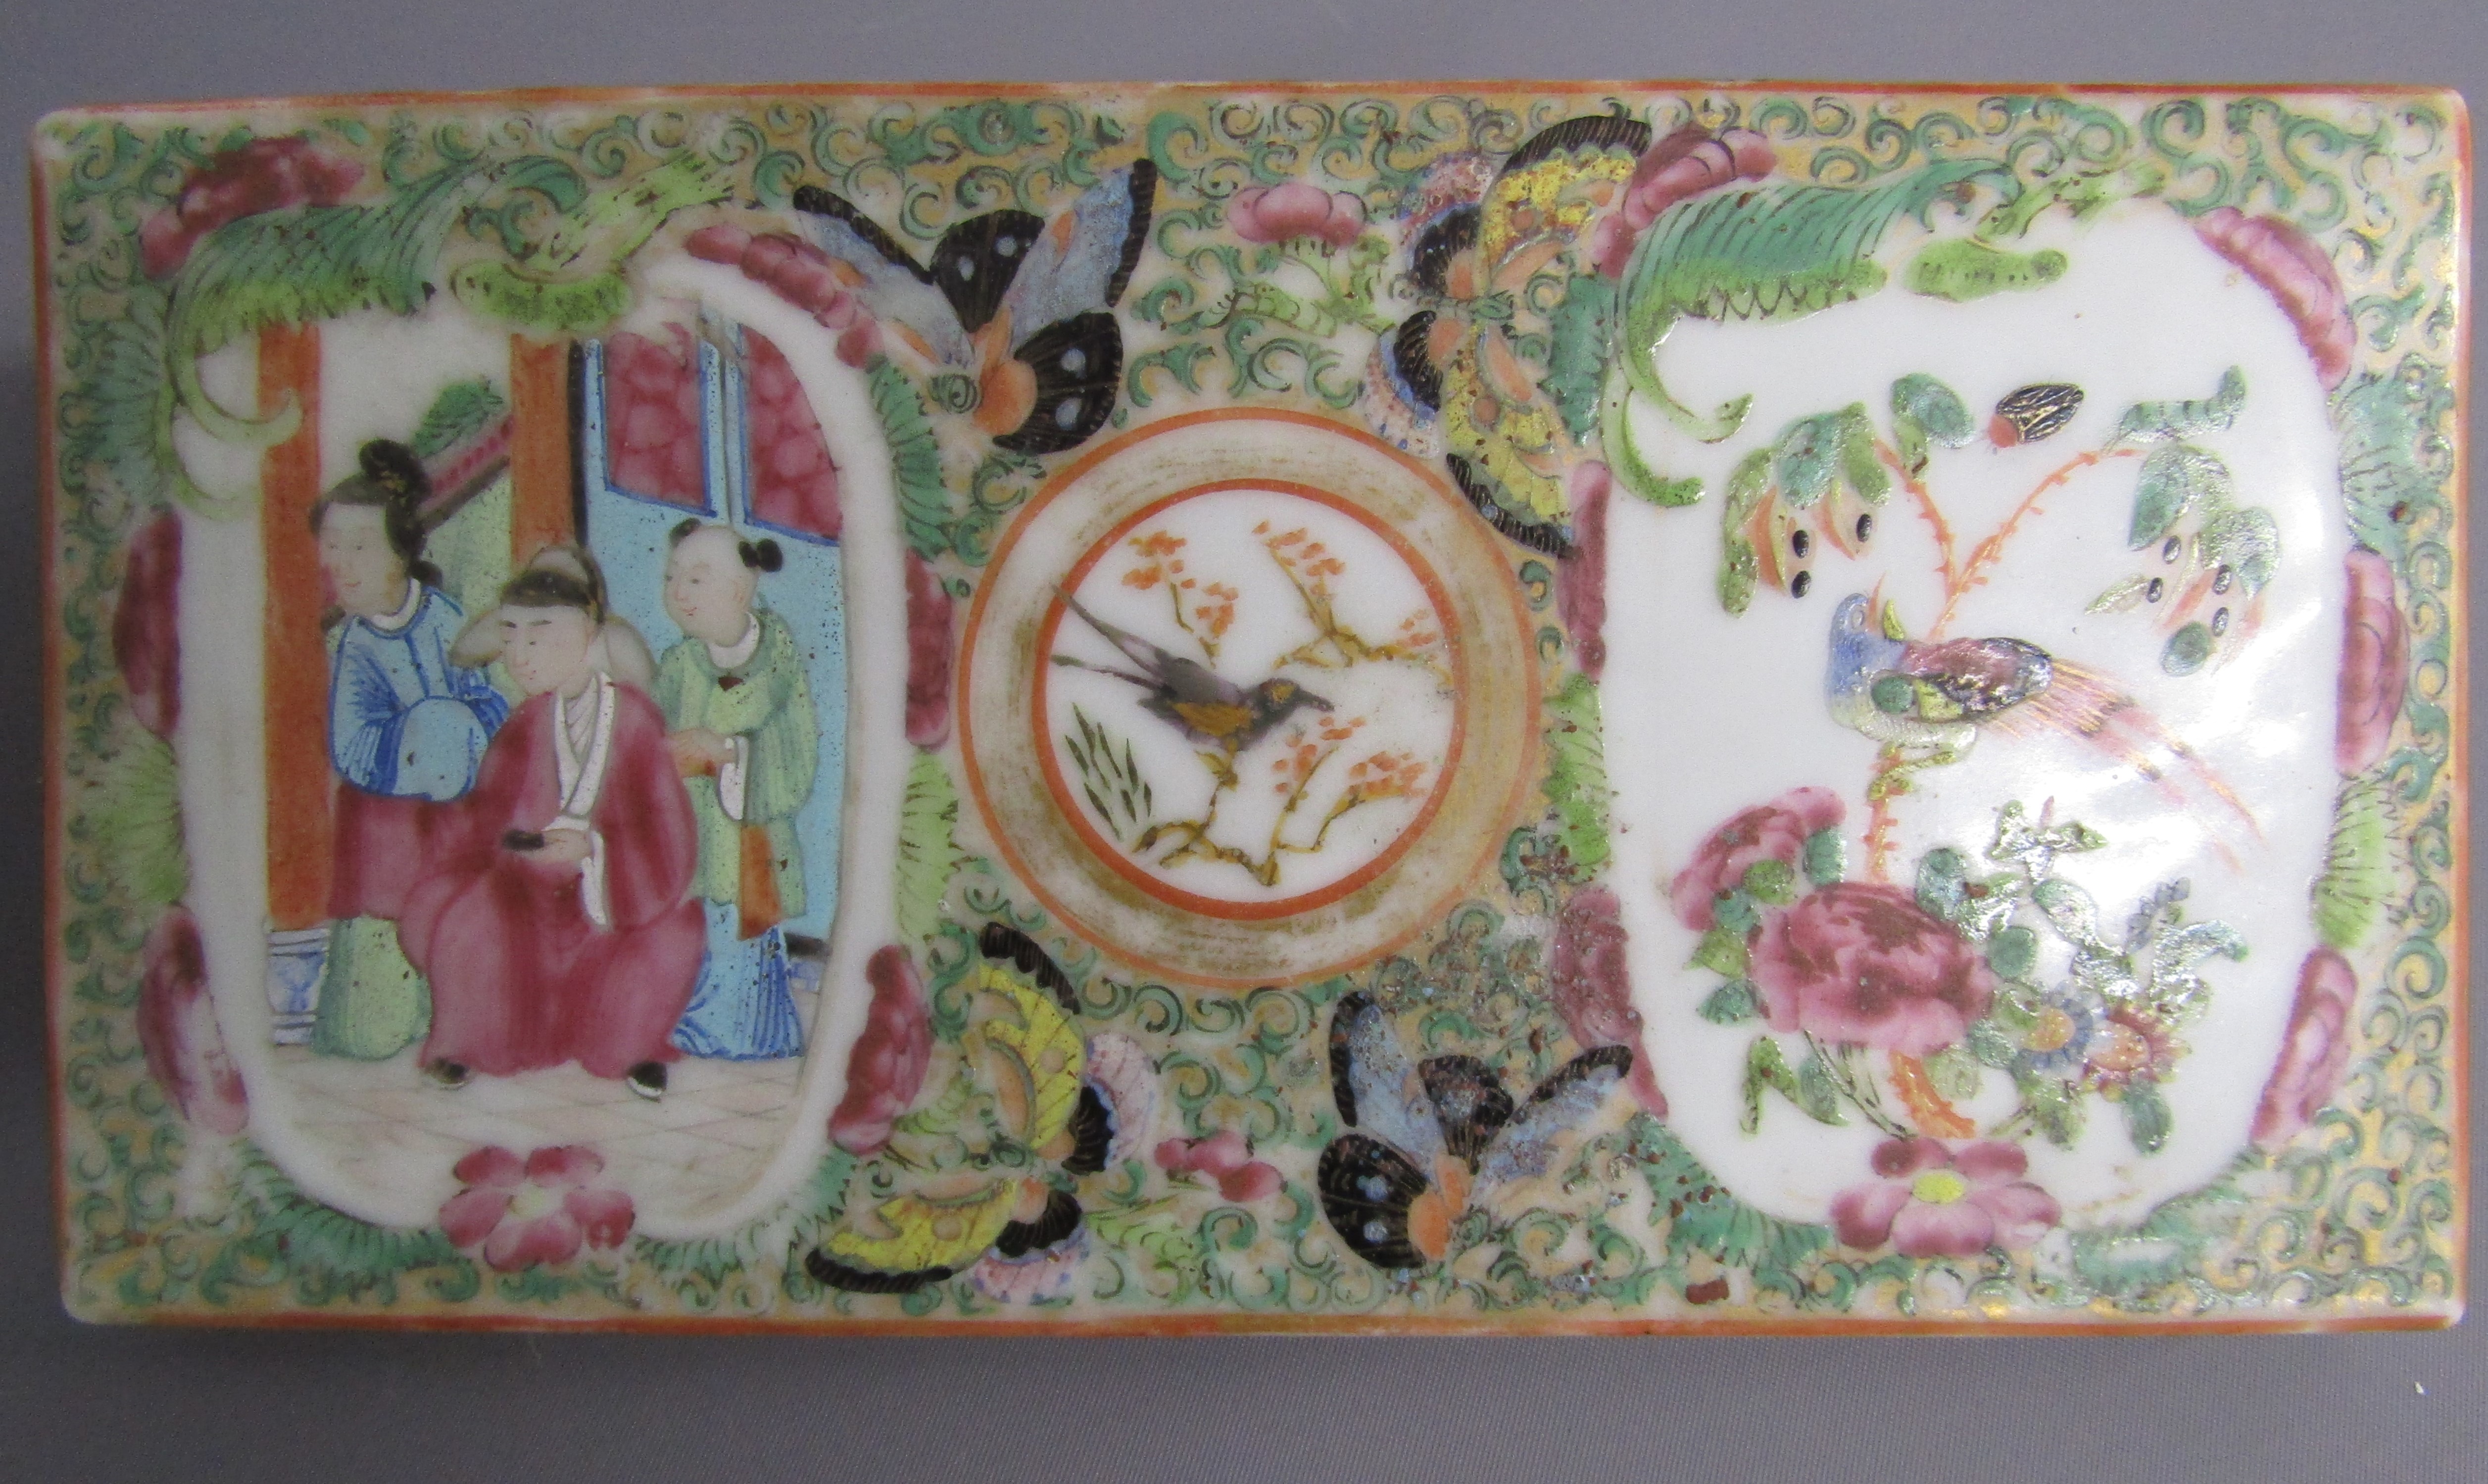 Cantonese lidded porcelain pen pot painted with figures and birds - approx. 9cm x 10cm x 6cm - Image 3 of 11